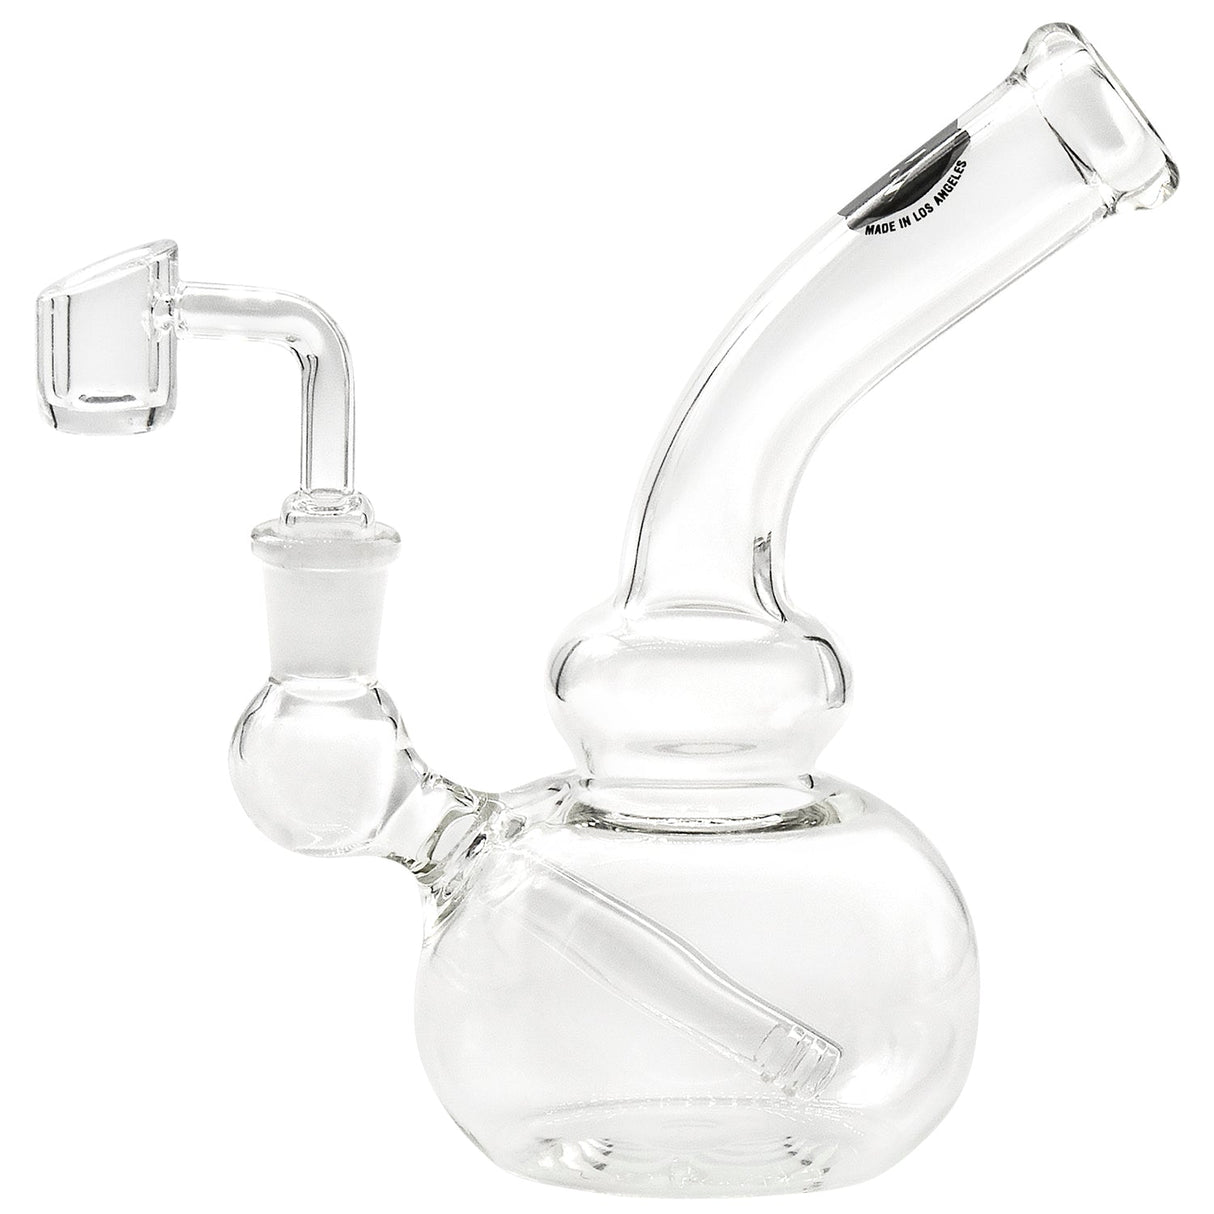 LA Pipes Bubble Concentrate Waterpipe, 6" Borosilicate Glass, Side View on White Background